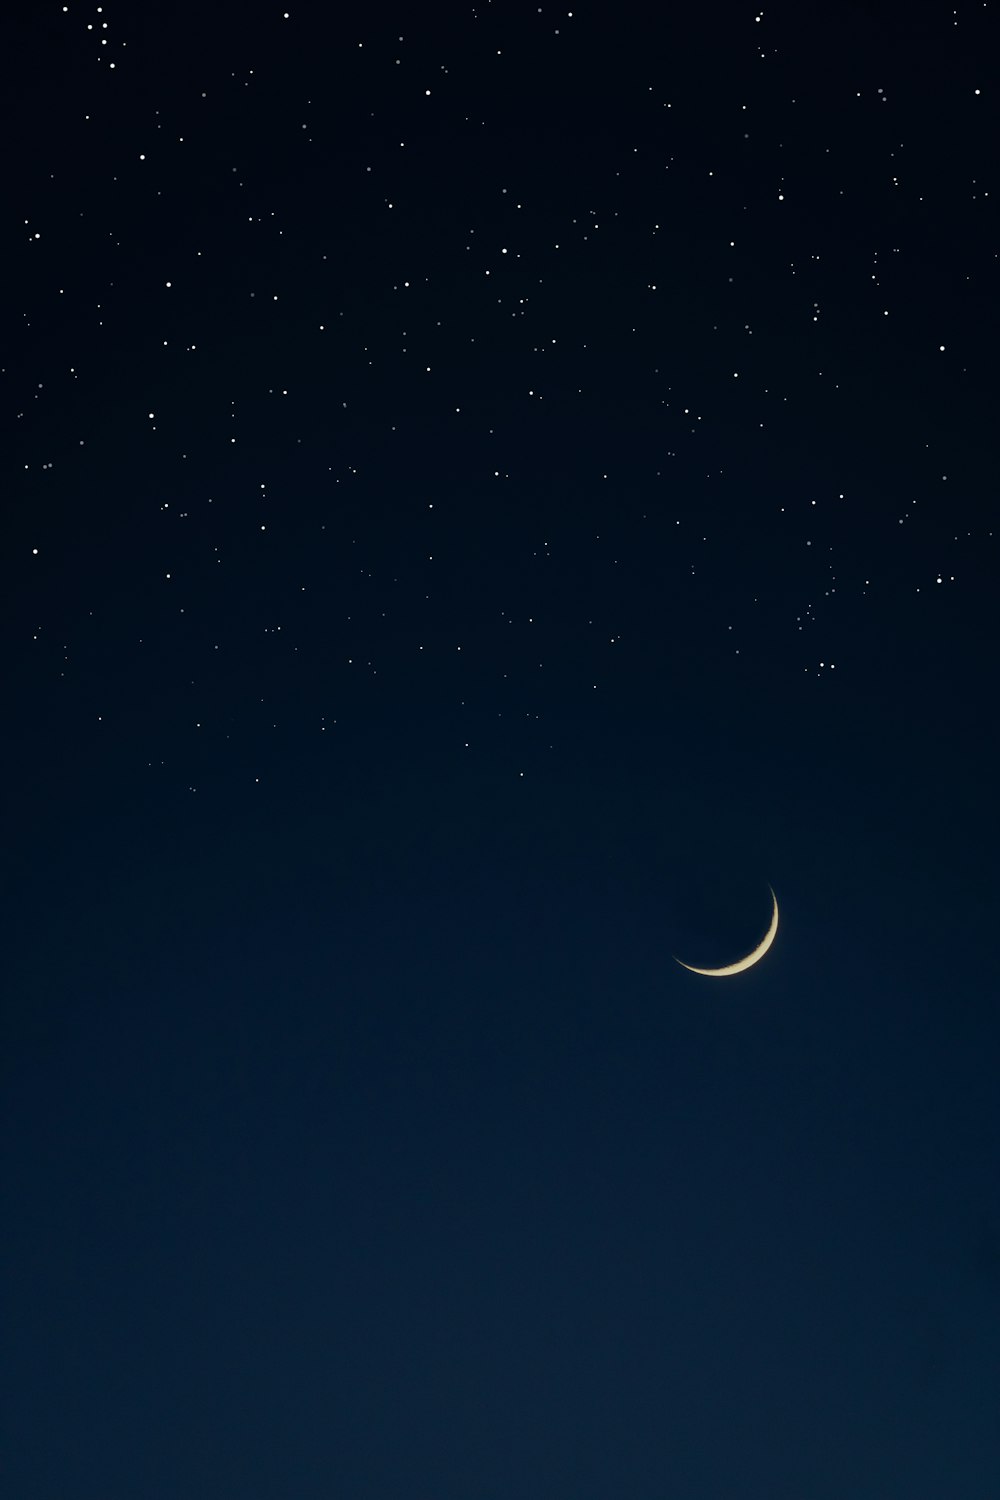 the moon and the stars in the night sky